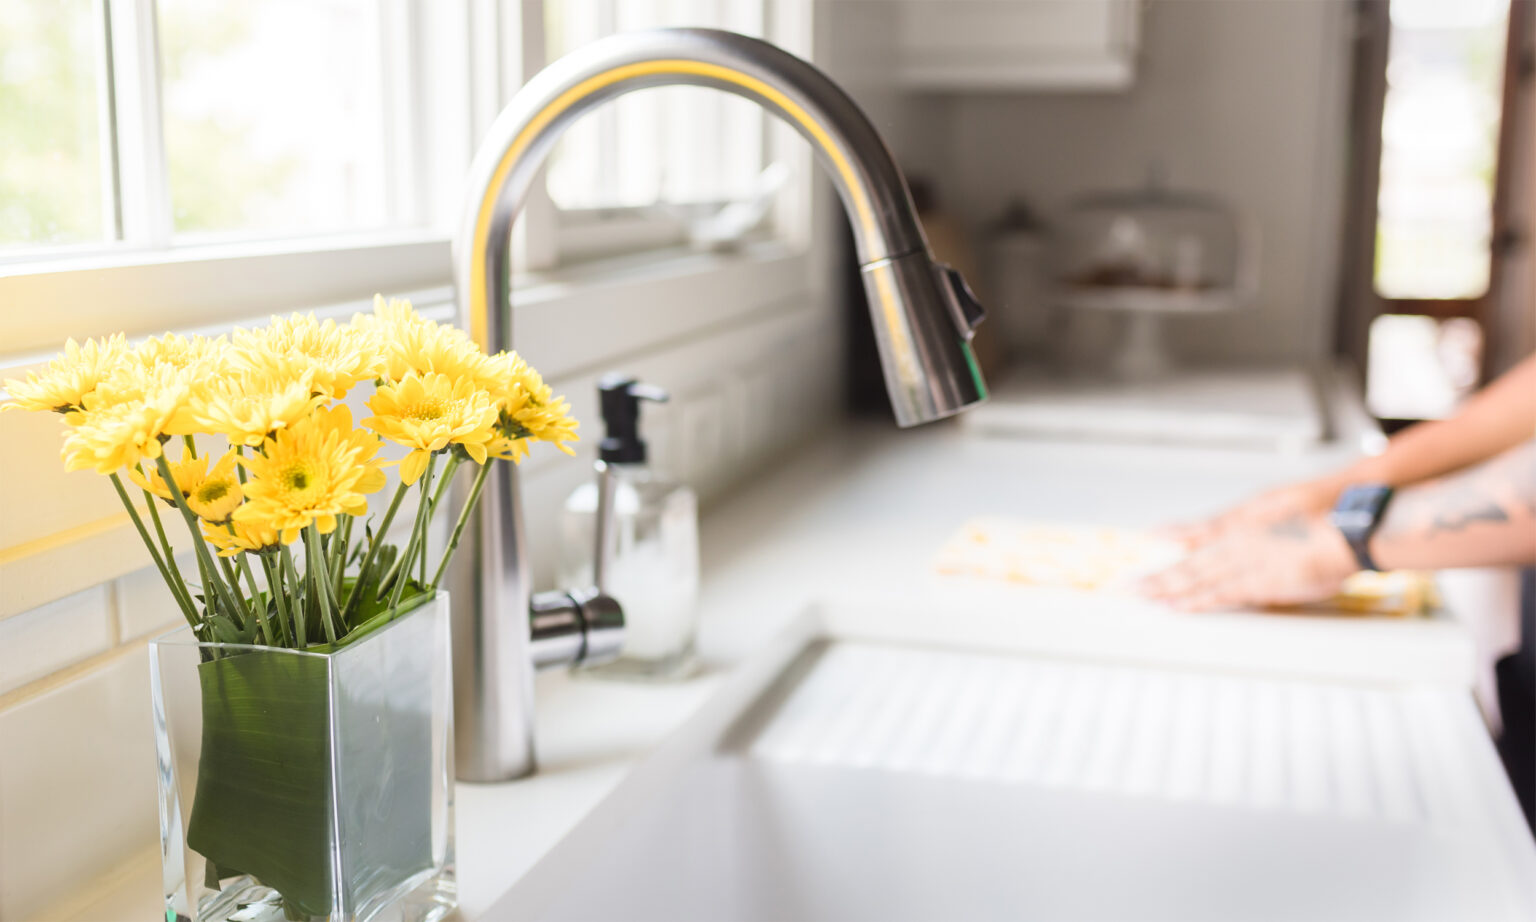 Clean sink with fresh flowers and cleaner's hands